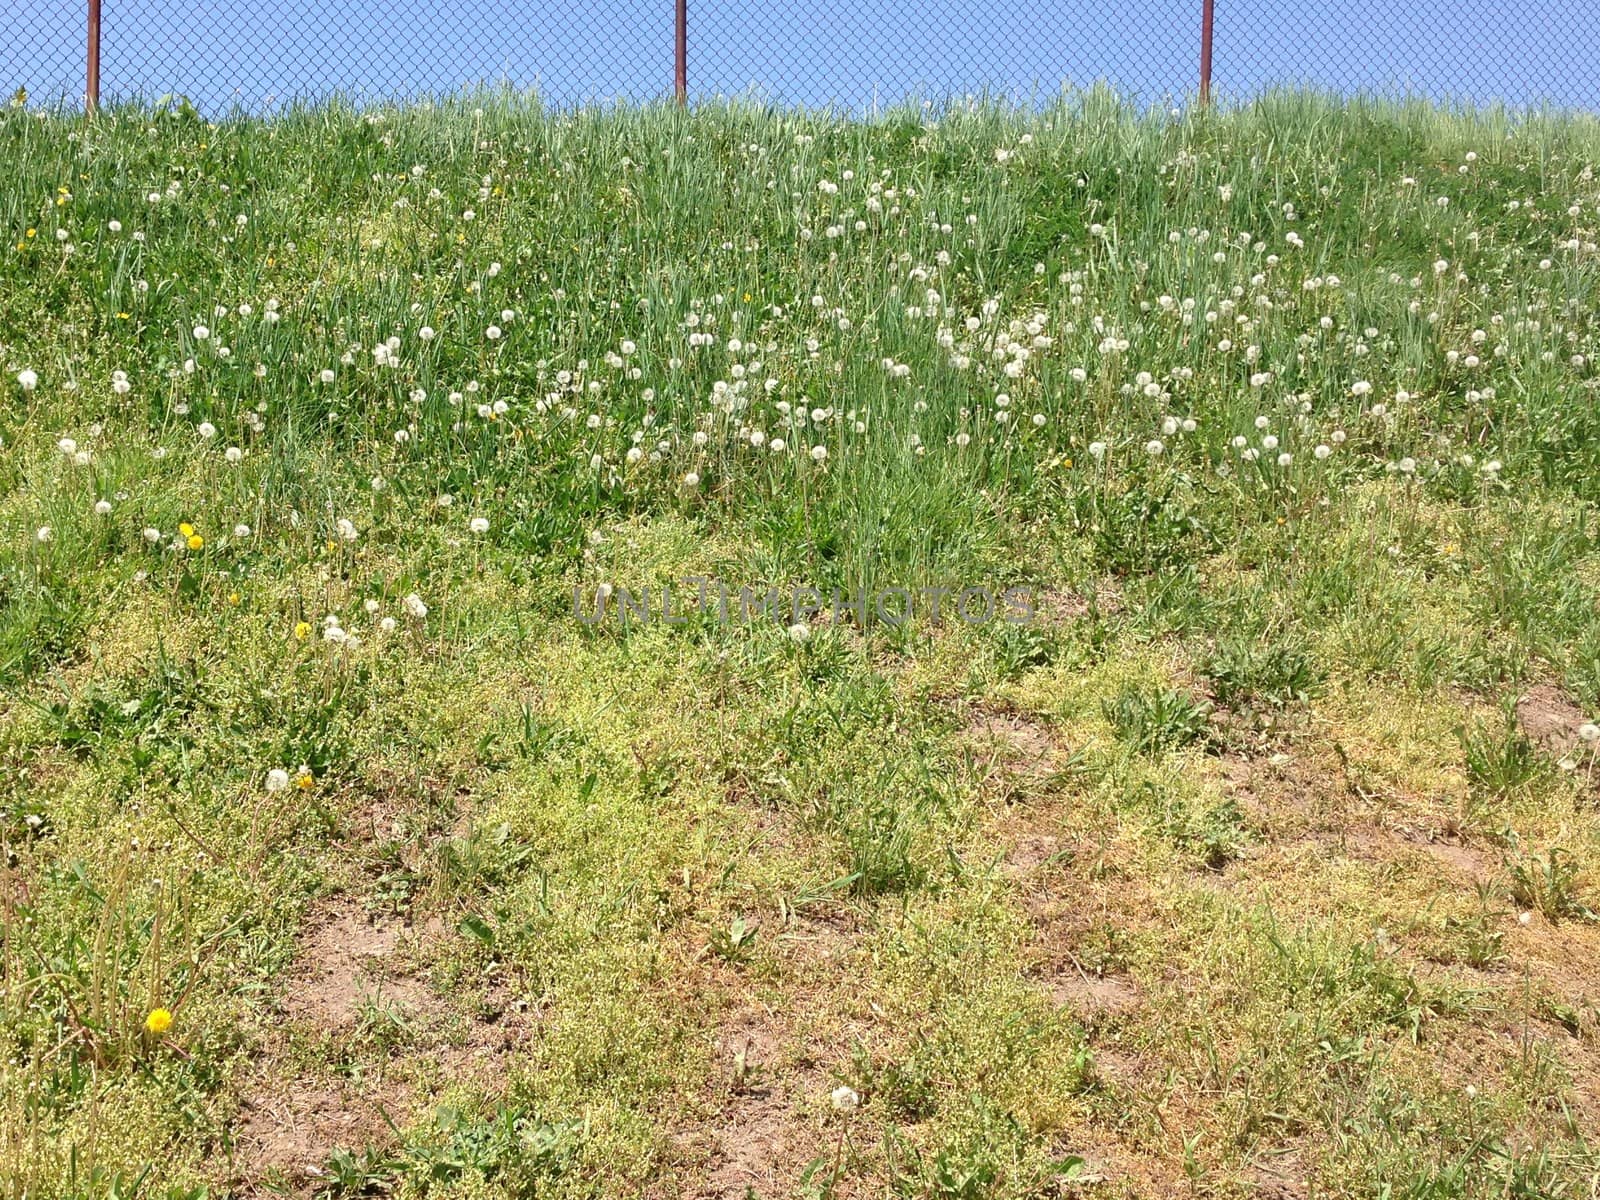 A hill with dandelions and grass and a fence, with blue sky in the background.